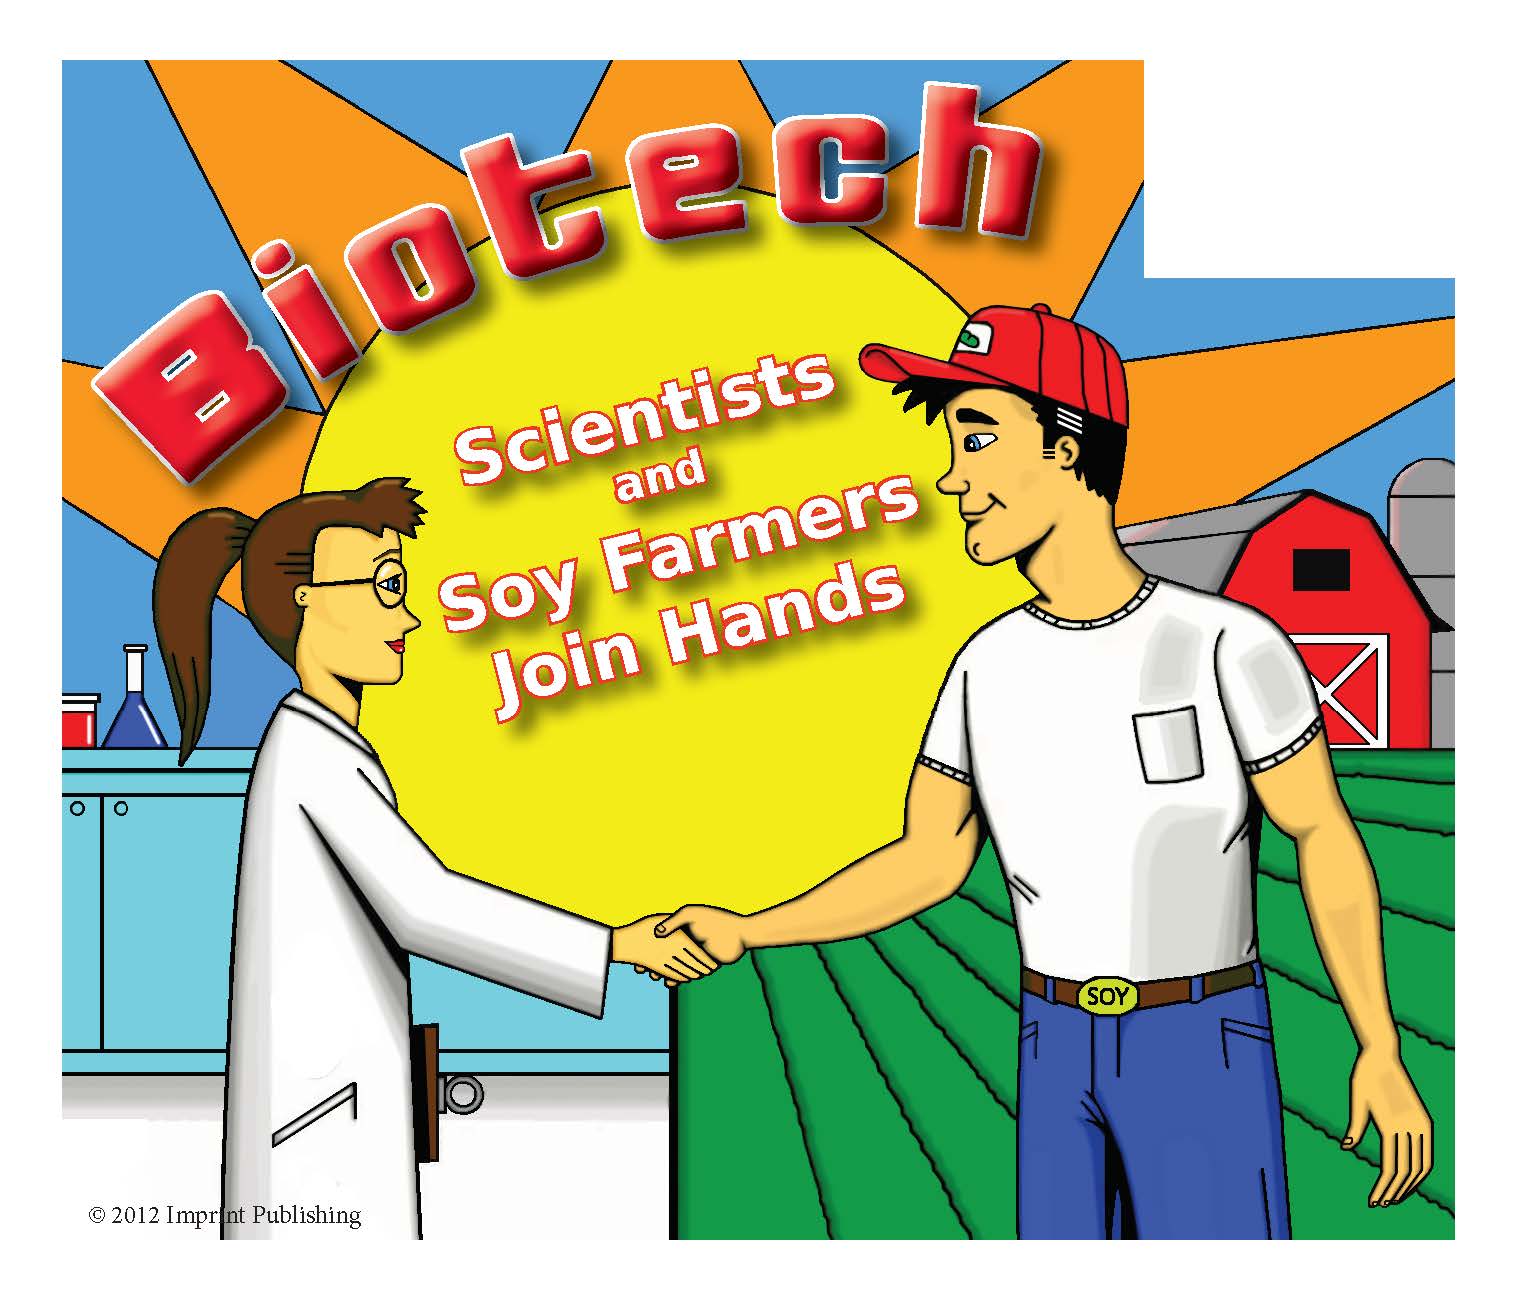 BIOTECH: SCIENTISTS AND SOY FARMERS JOIN HANDS